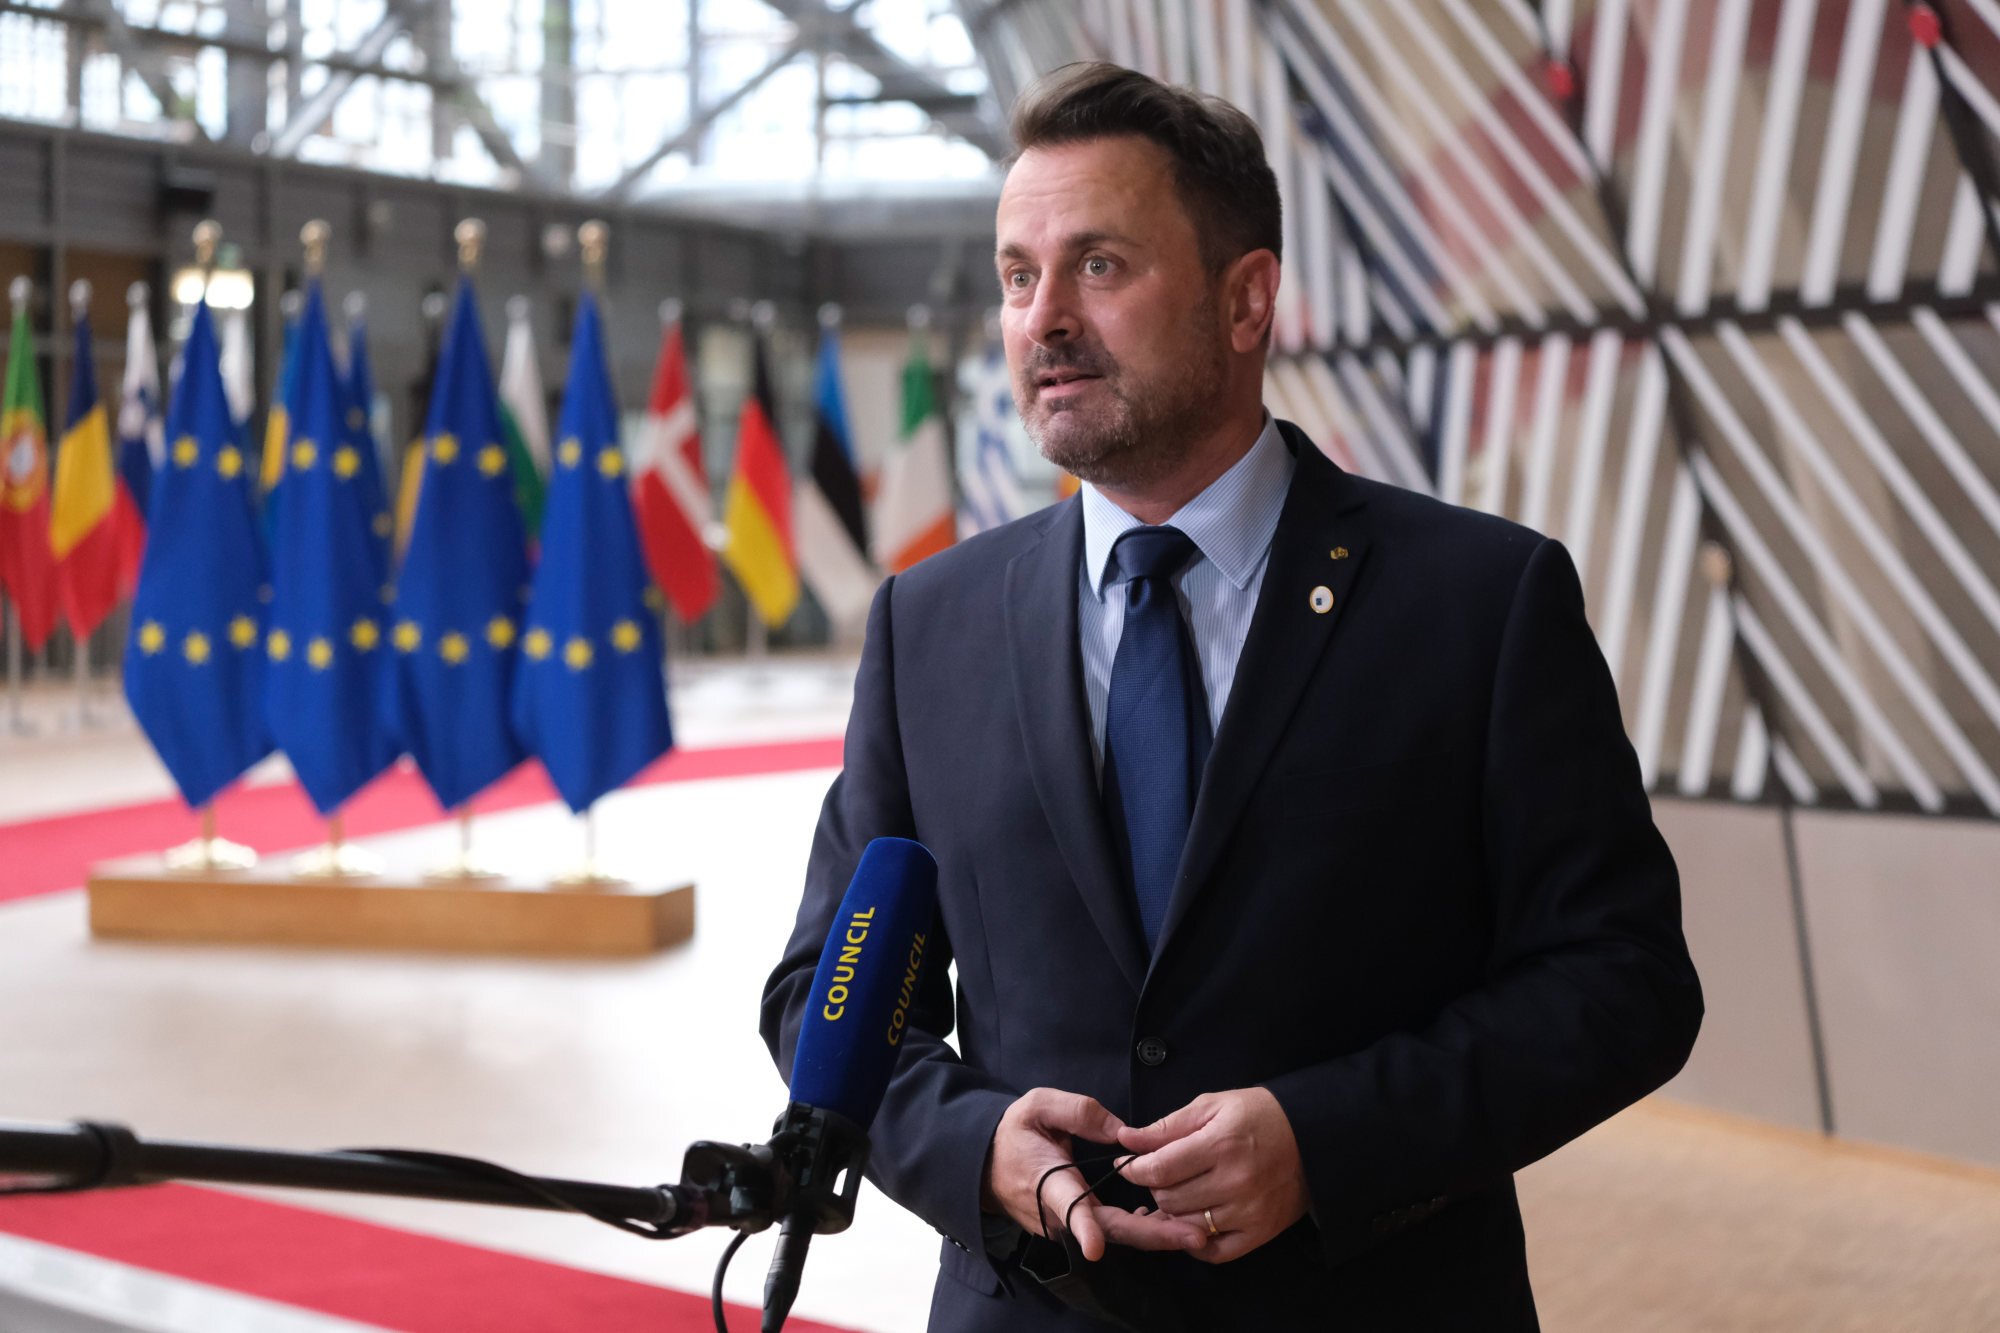 Luxembourg’s Prime Minister Xavier Bettel is an outspoken advocate for LGBTQ+ rights. Photo: European Council/DPA